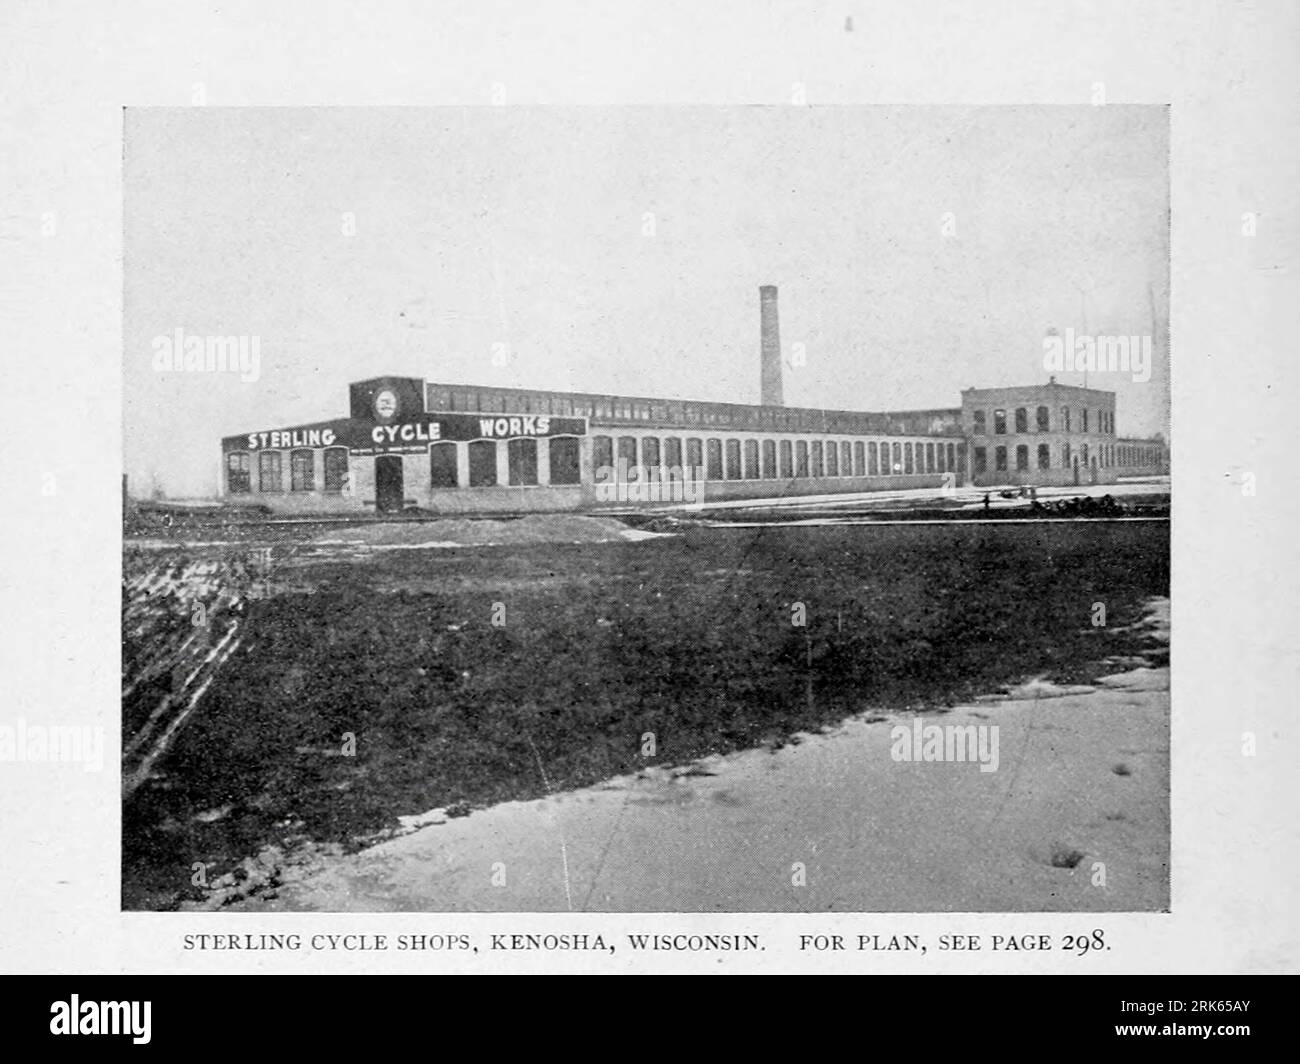 Sterling Cycle Works, Kenosha, Wisconsin from the Article MODERN MACHINE-SHOP ECONOMICS PRIME REQUISITES OF SHOP CONSTRUCTION By Horace L. Arnold from The Engineering Magazine DEVOTED TO INDUSTRIAL PROGRESS Volume XI October 1896 NEW YORK The Engineering Magazine Co Stock Photo